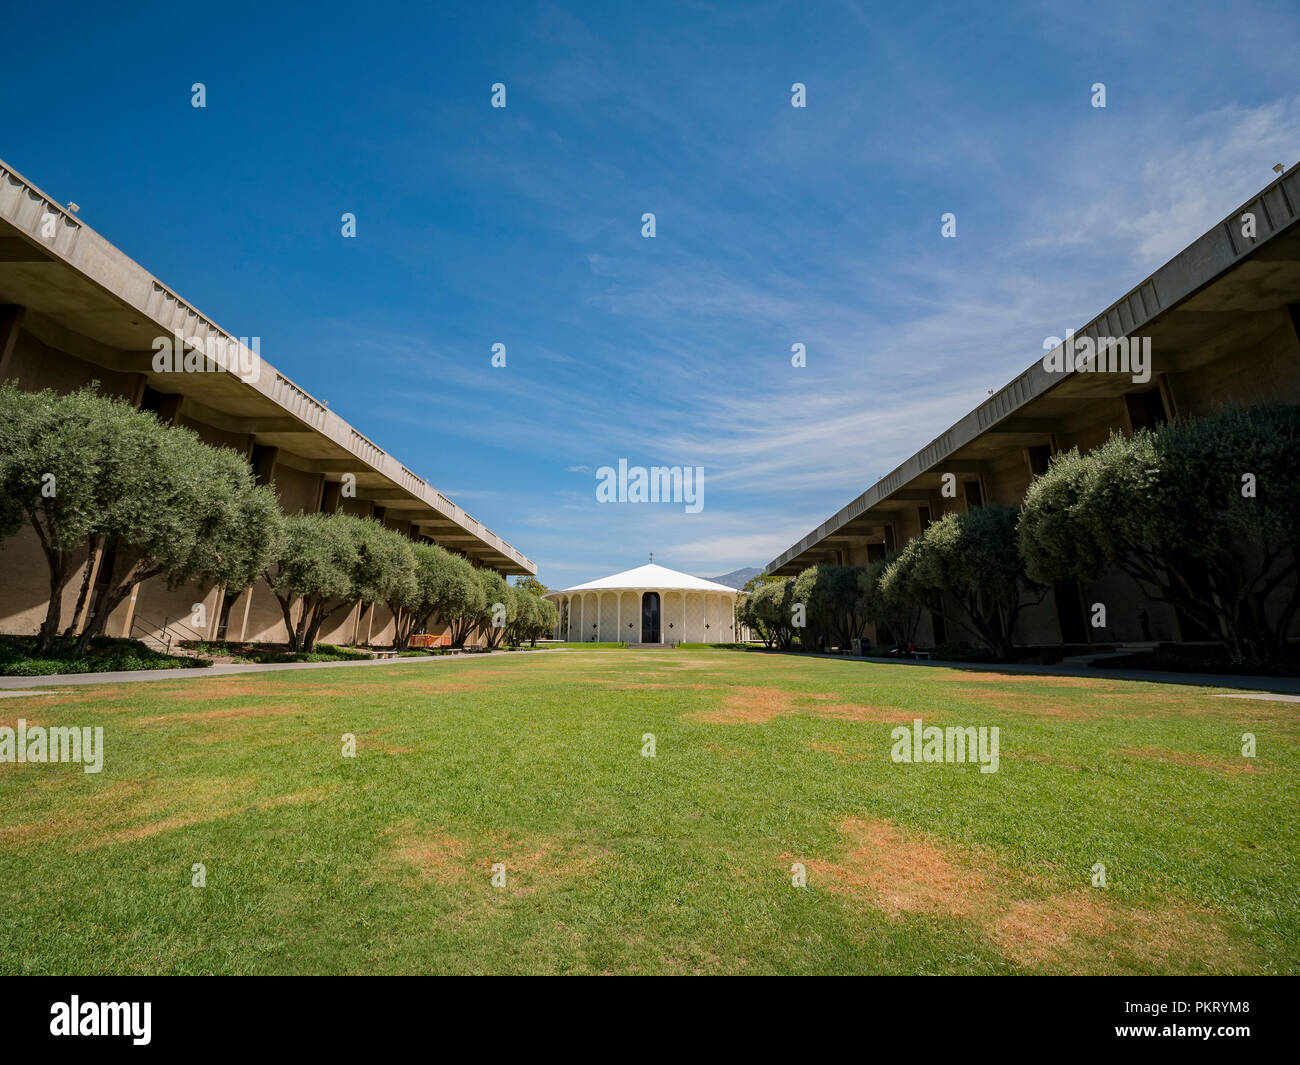 Los Angeles, JUL 21: Exterior view of the Beckman Auditorium in Caltech on JUL 21, 2018 at Los Angeles, California Stock Photo